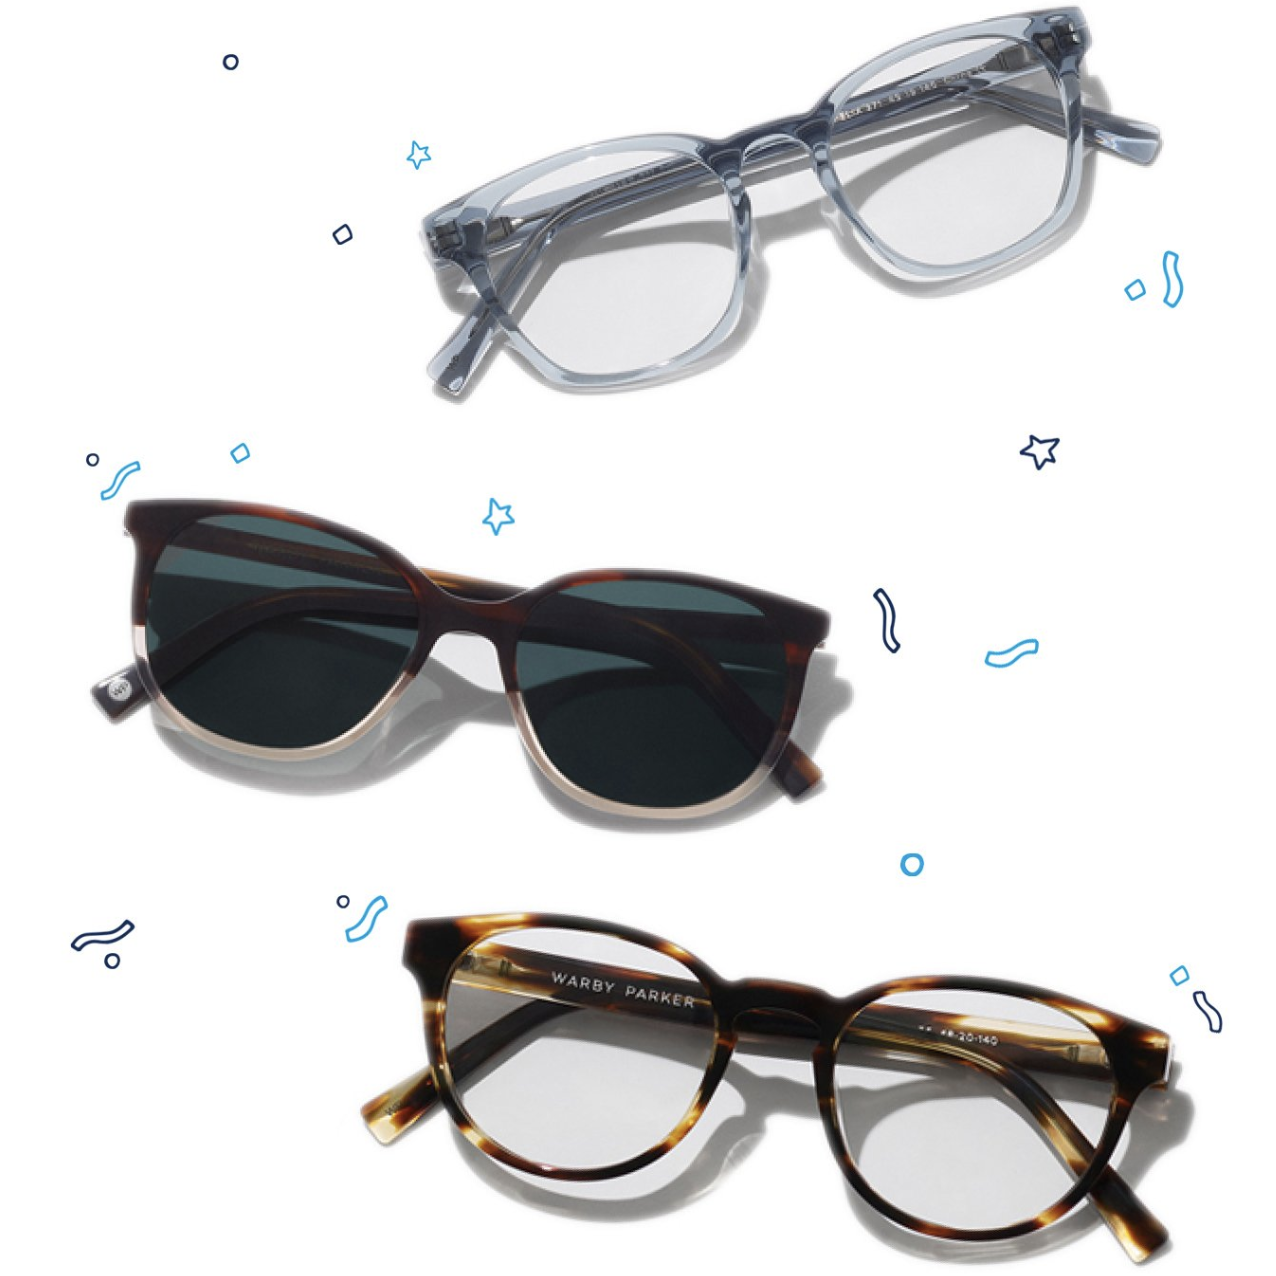 Warby Parker promo code: Save 15% plus get a $50 credit on your first ...